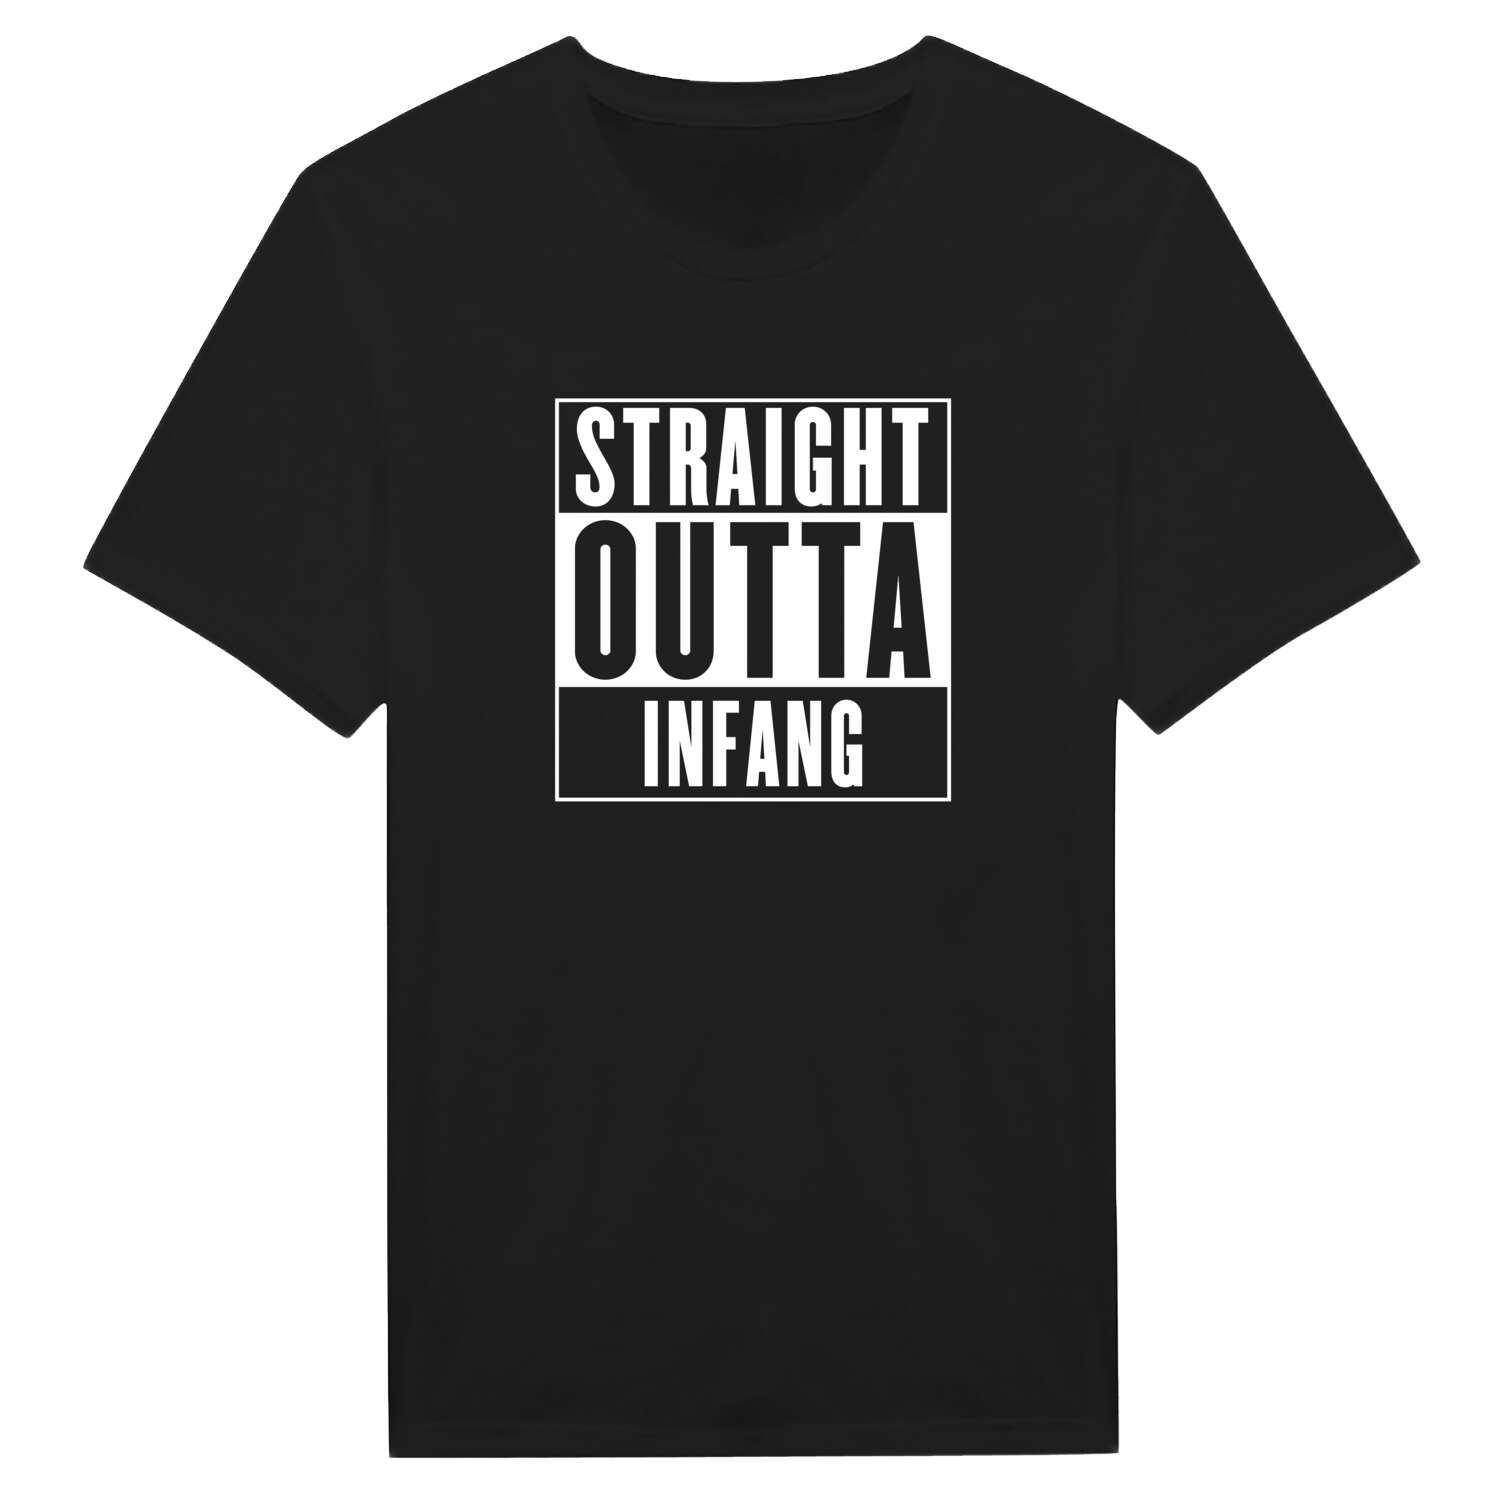 Infang T-Shirt »Straight Outta«